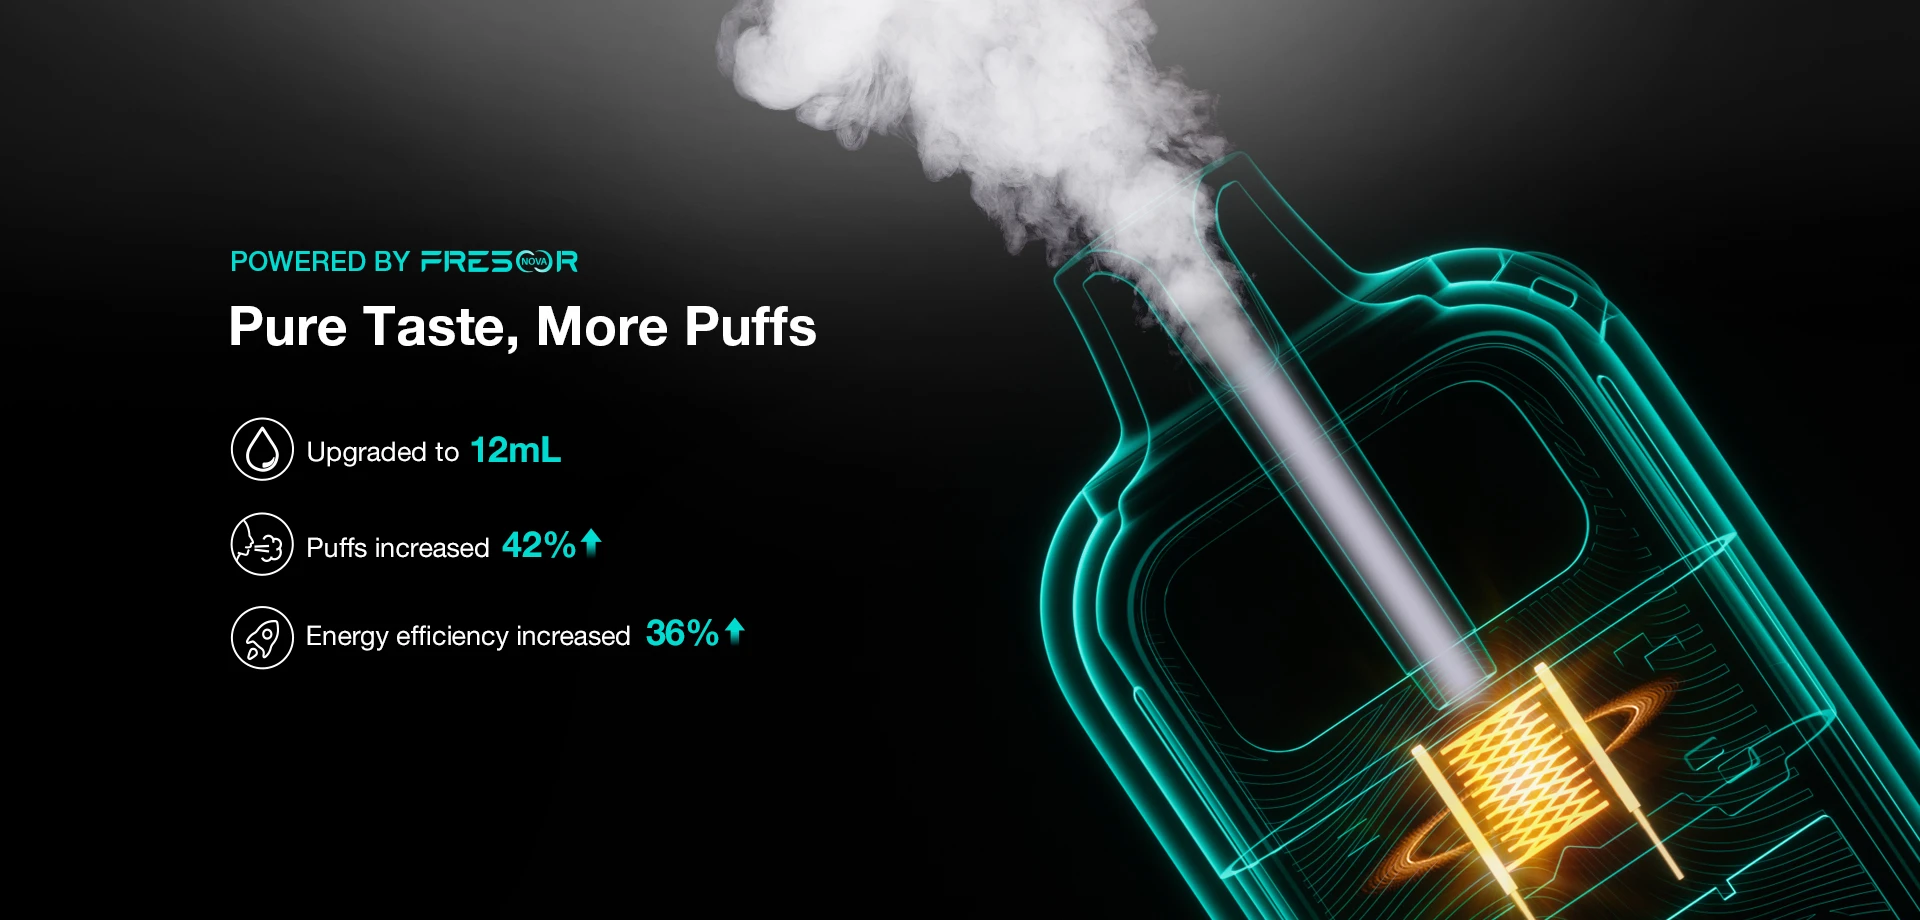 POWERED BY FRESOR Pure Taste, More Puffs Upgraded to 12mL Puffs increased 42% Energy efficiency increased 36%